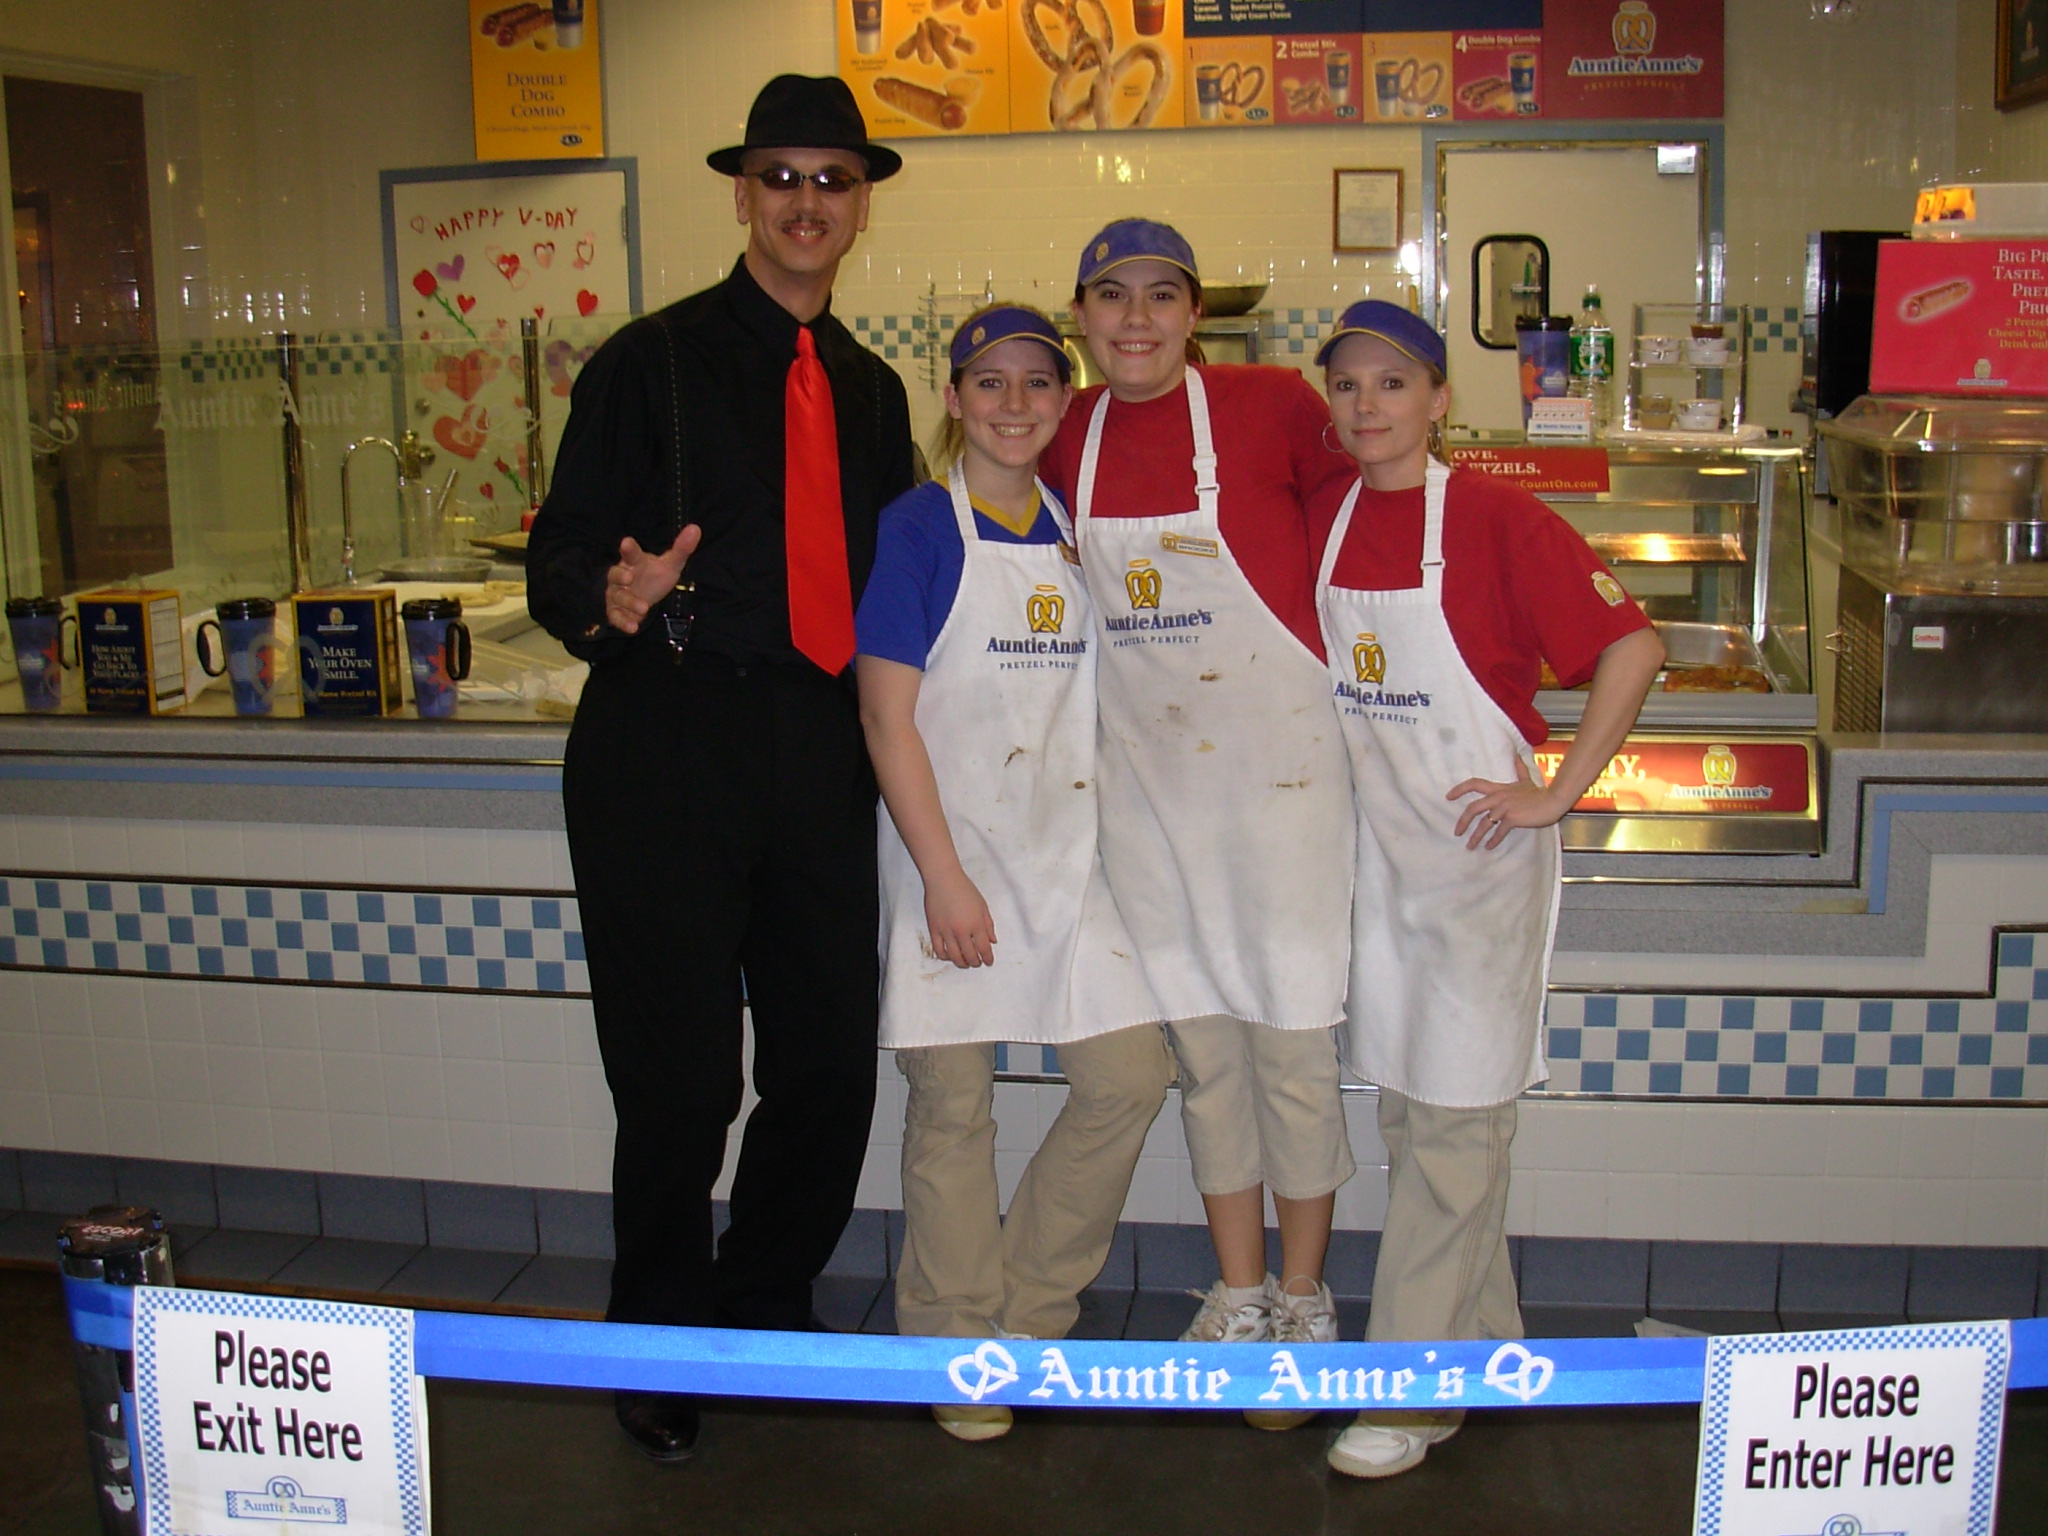 Mitch gets a big "Hello" from th Auntie Anne's Pretzel Girls...
they were dancin' while twistin' the dough...
